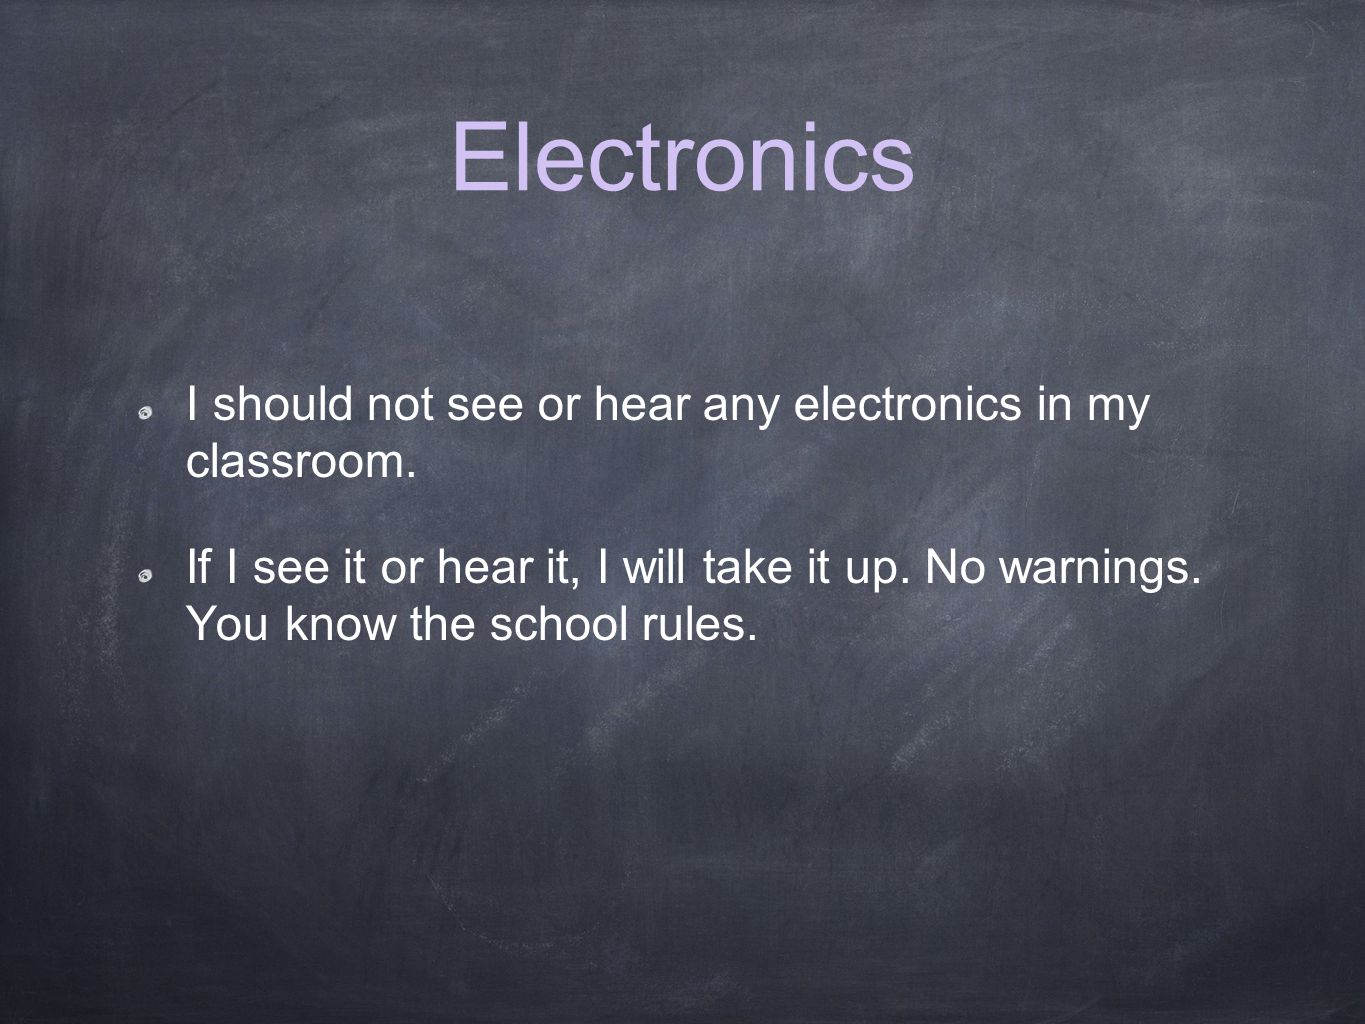 Electronics I should not see or hear any electronics in my classroom.